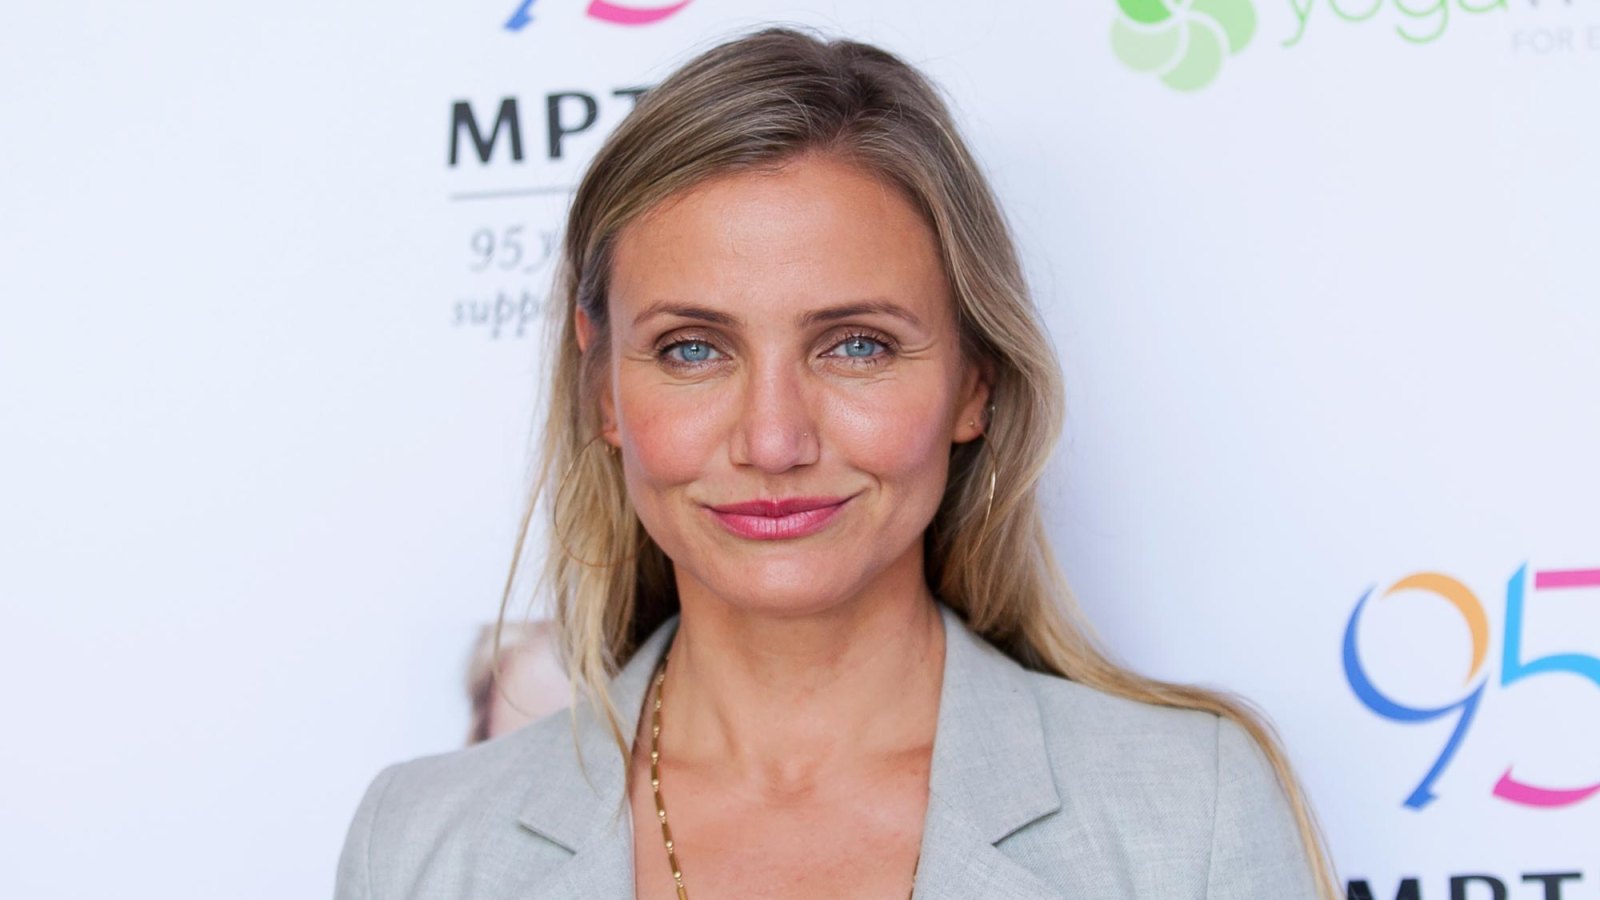 Cameron Diaz Wants to Normalize Married Couples Having Separate Bedrooms — Even Separate Houses 403